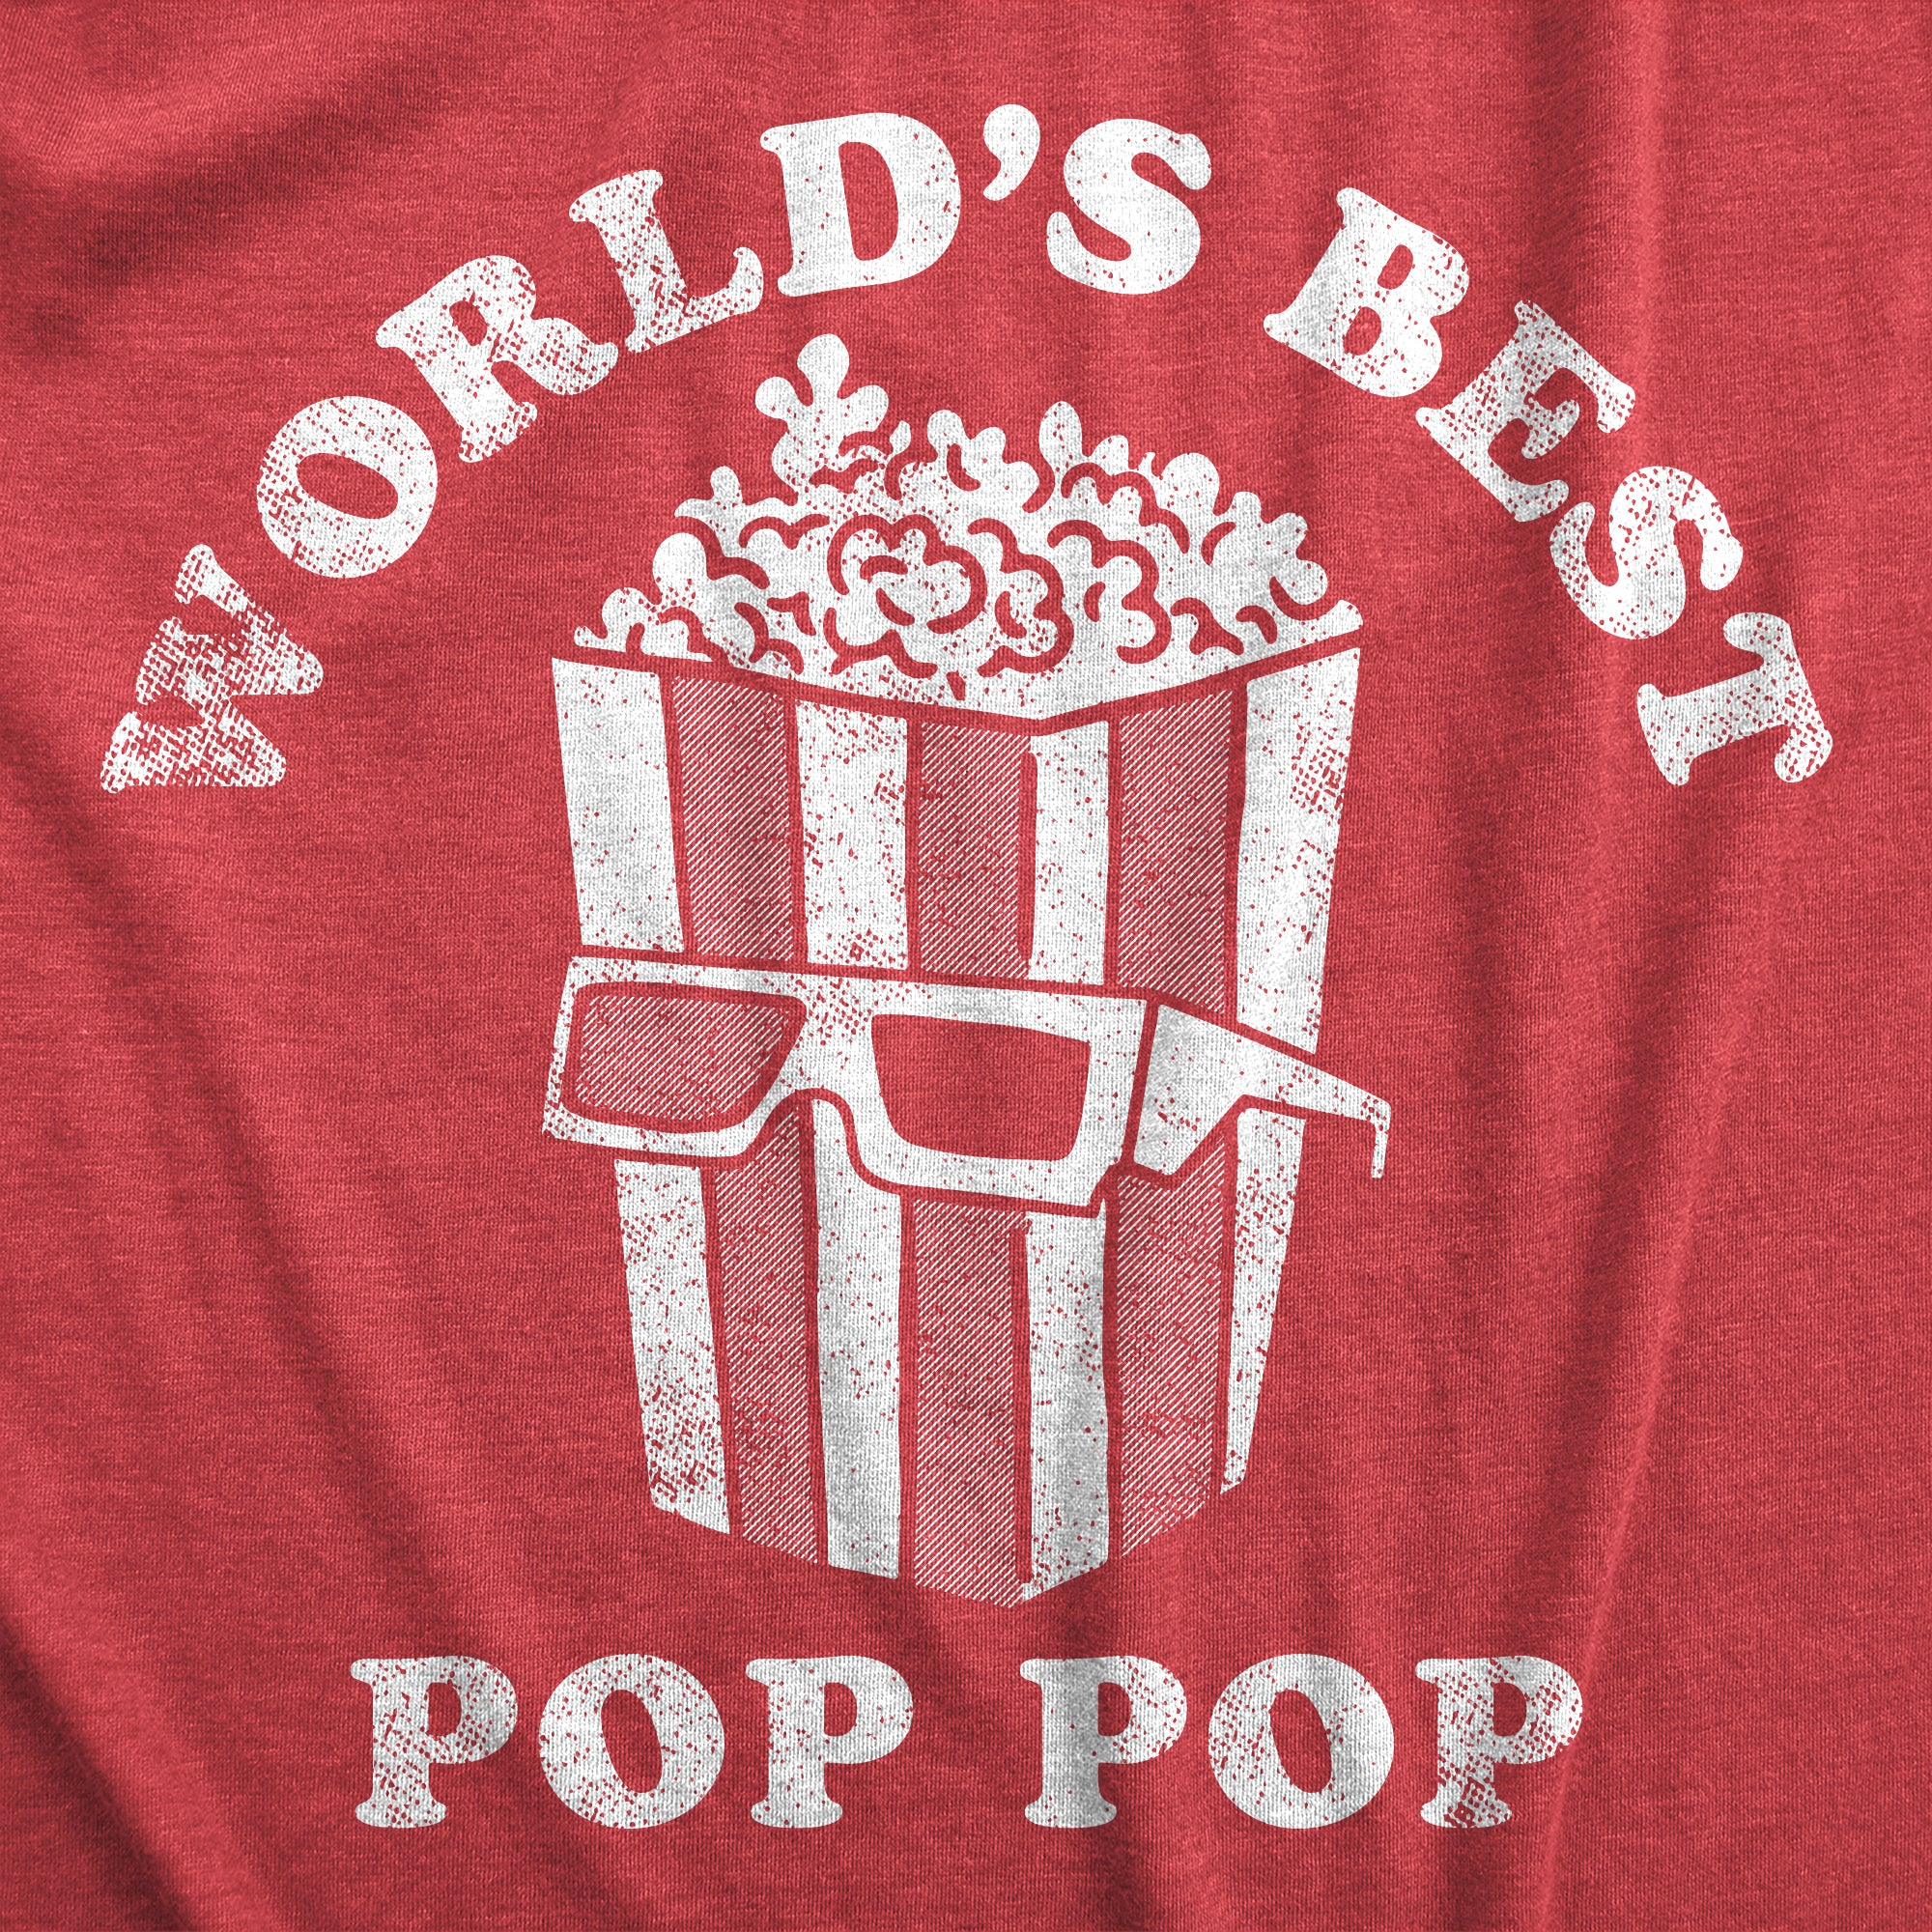 Funny Heather Red - Pop Popcorn Worlds Best Pop Pop Mens T Shirt Nerdy Father's Day Food Tee